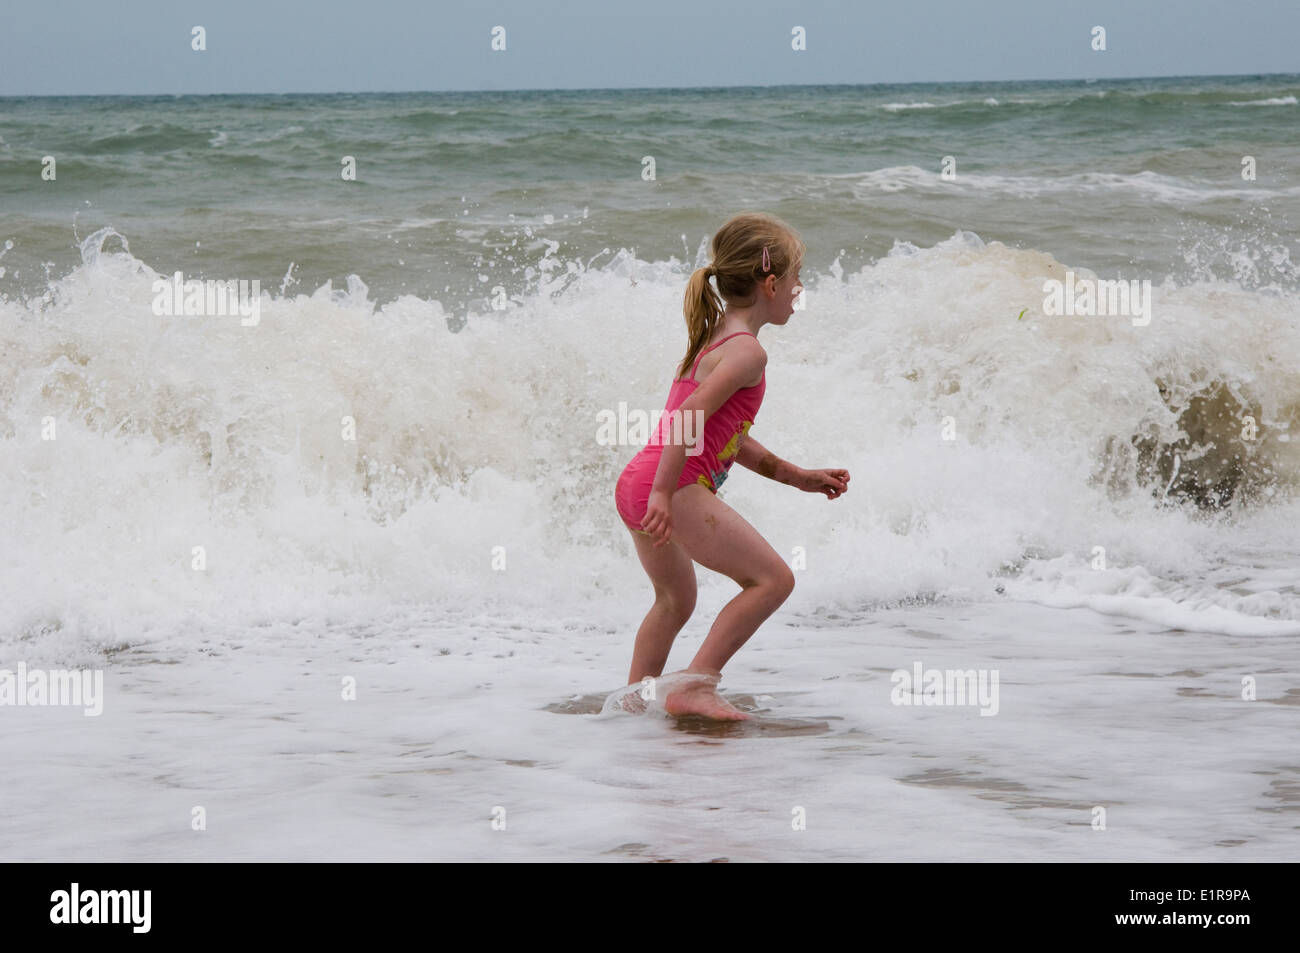 young girl playing in the waves of a rough sea Stock Photo